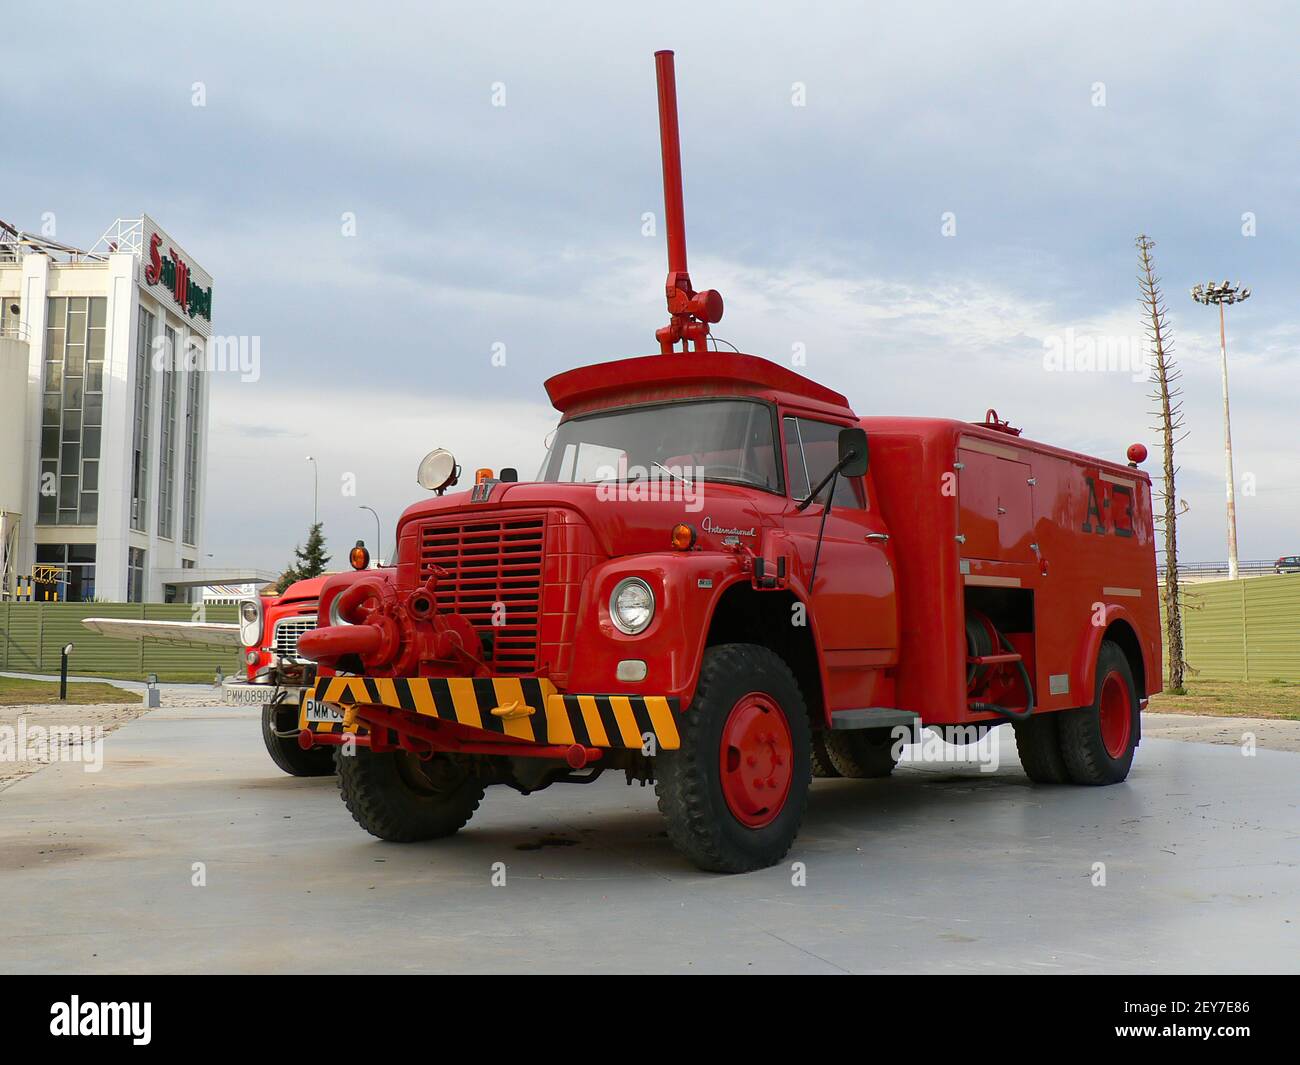 Old International fire engine at Malaga aviation museum, Spain. Stock Photo